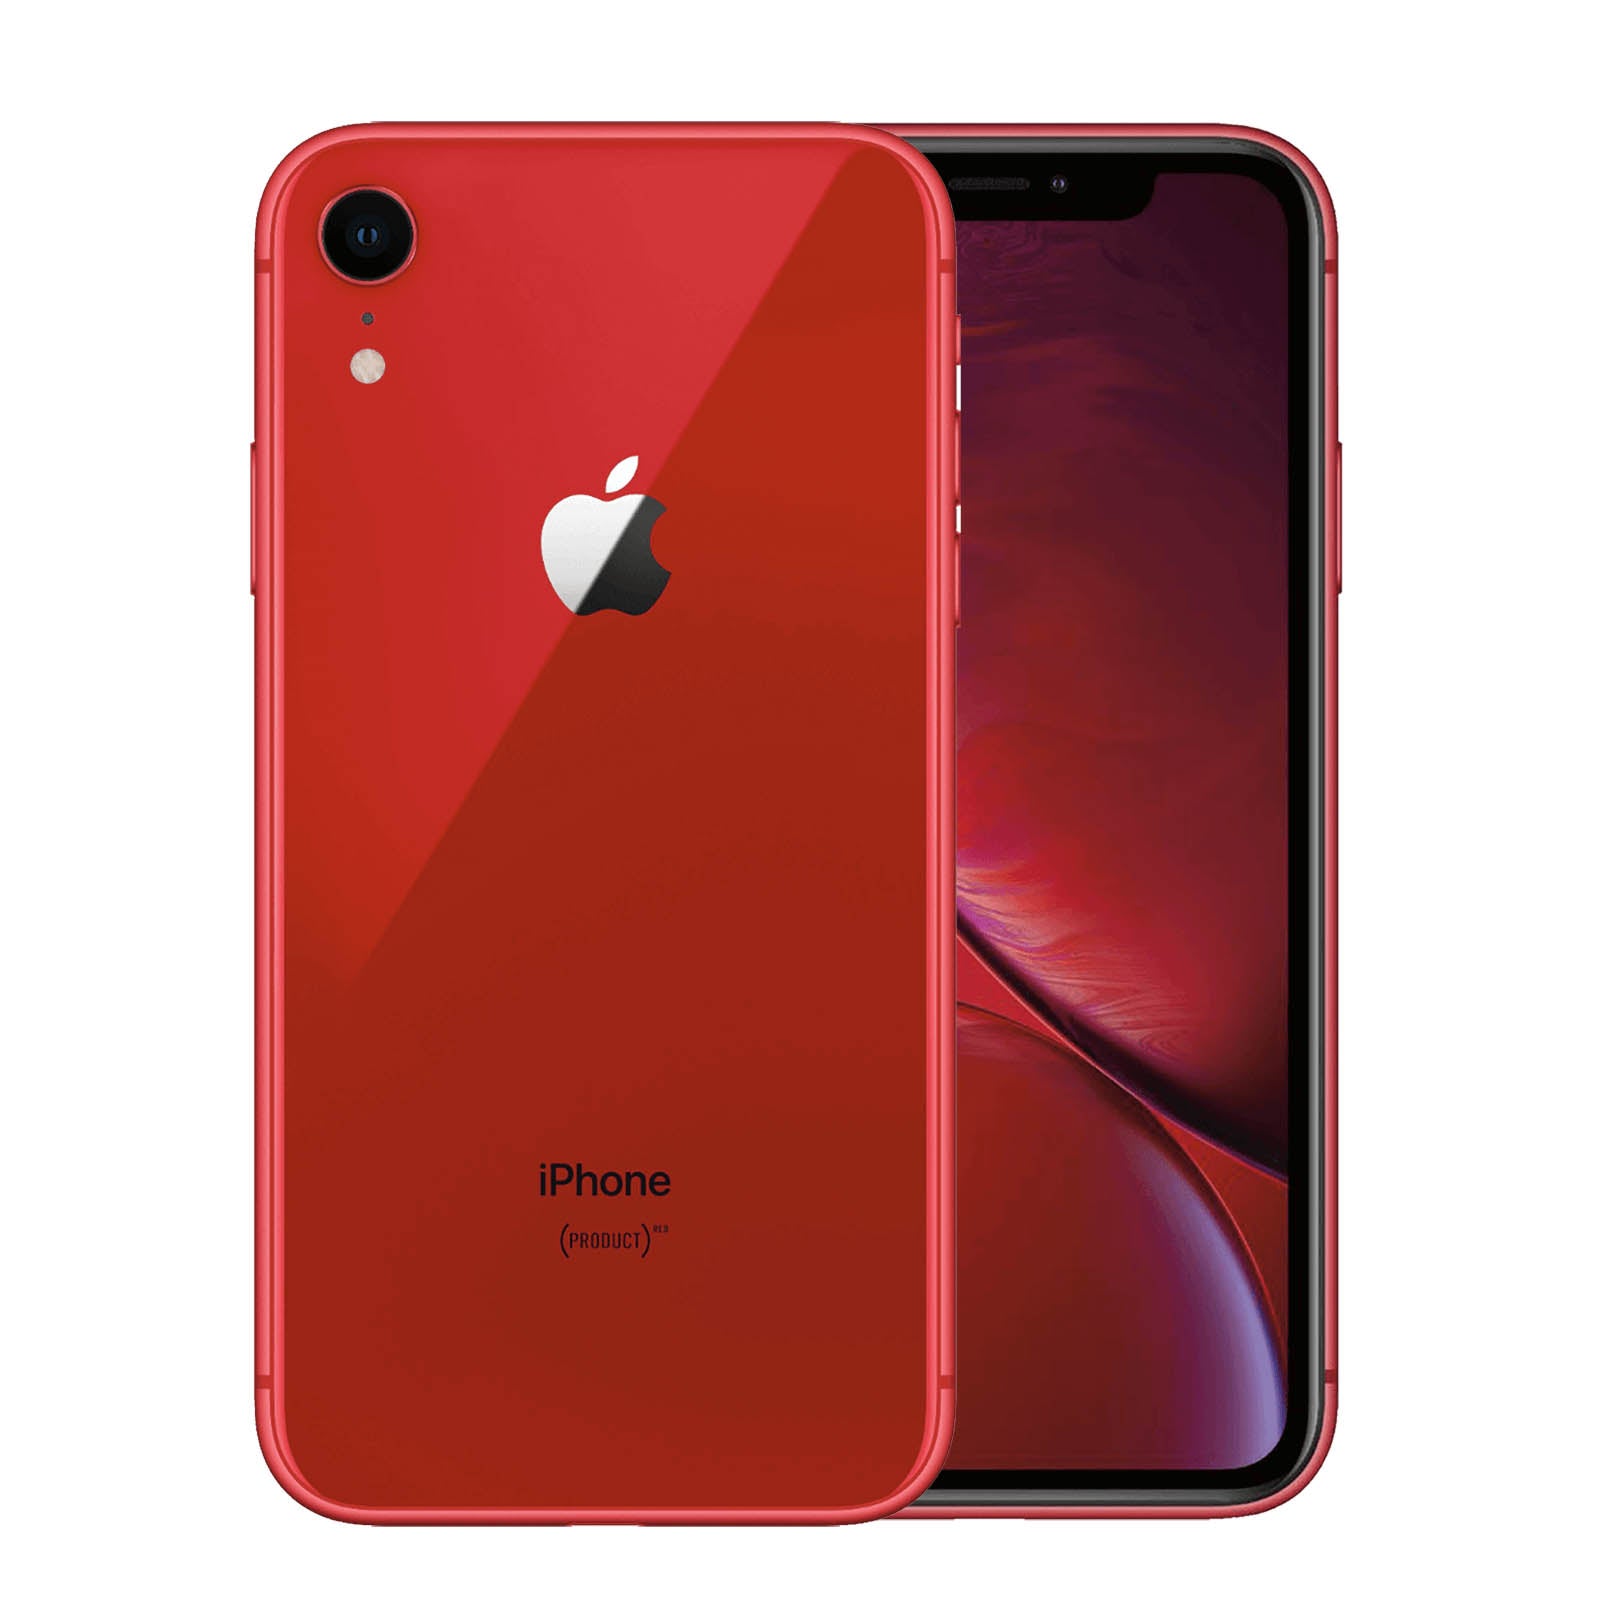 Apple iPhone XR 64GB Product Product Red Makellos - Ohne Vertrag